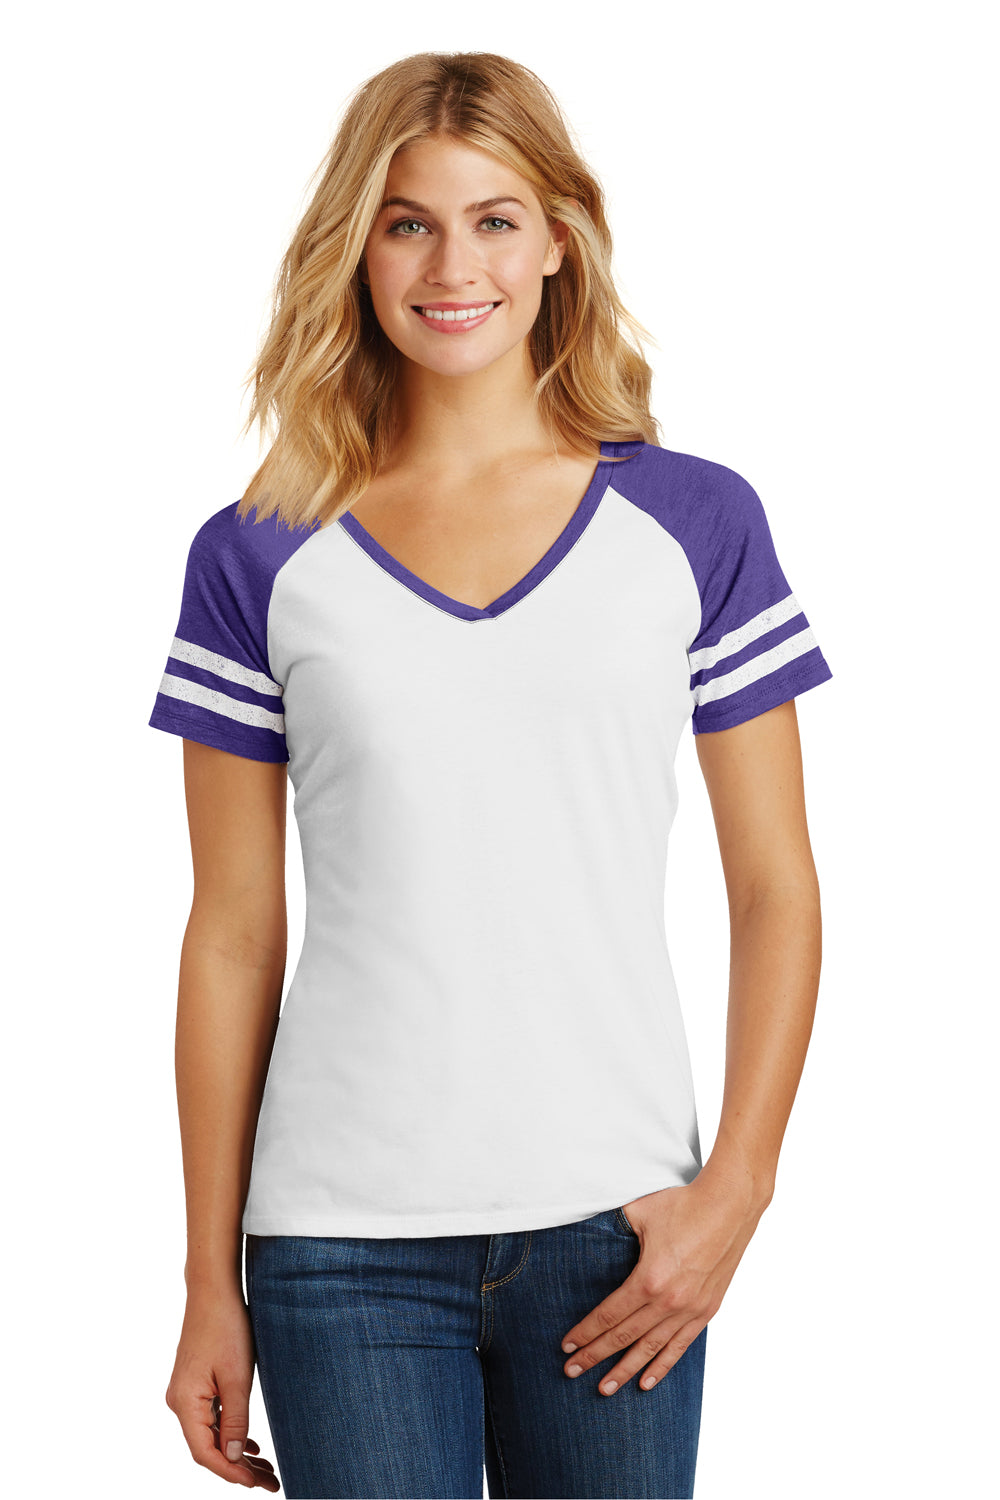 District DM476 Womens Game Short Sleeve V-Neck T-Shirt White/Heather Purple Front